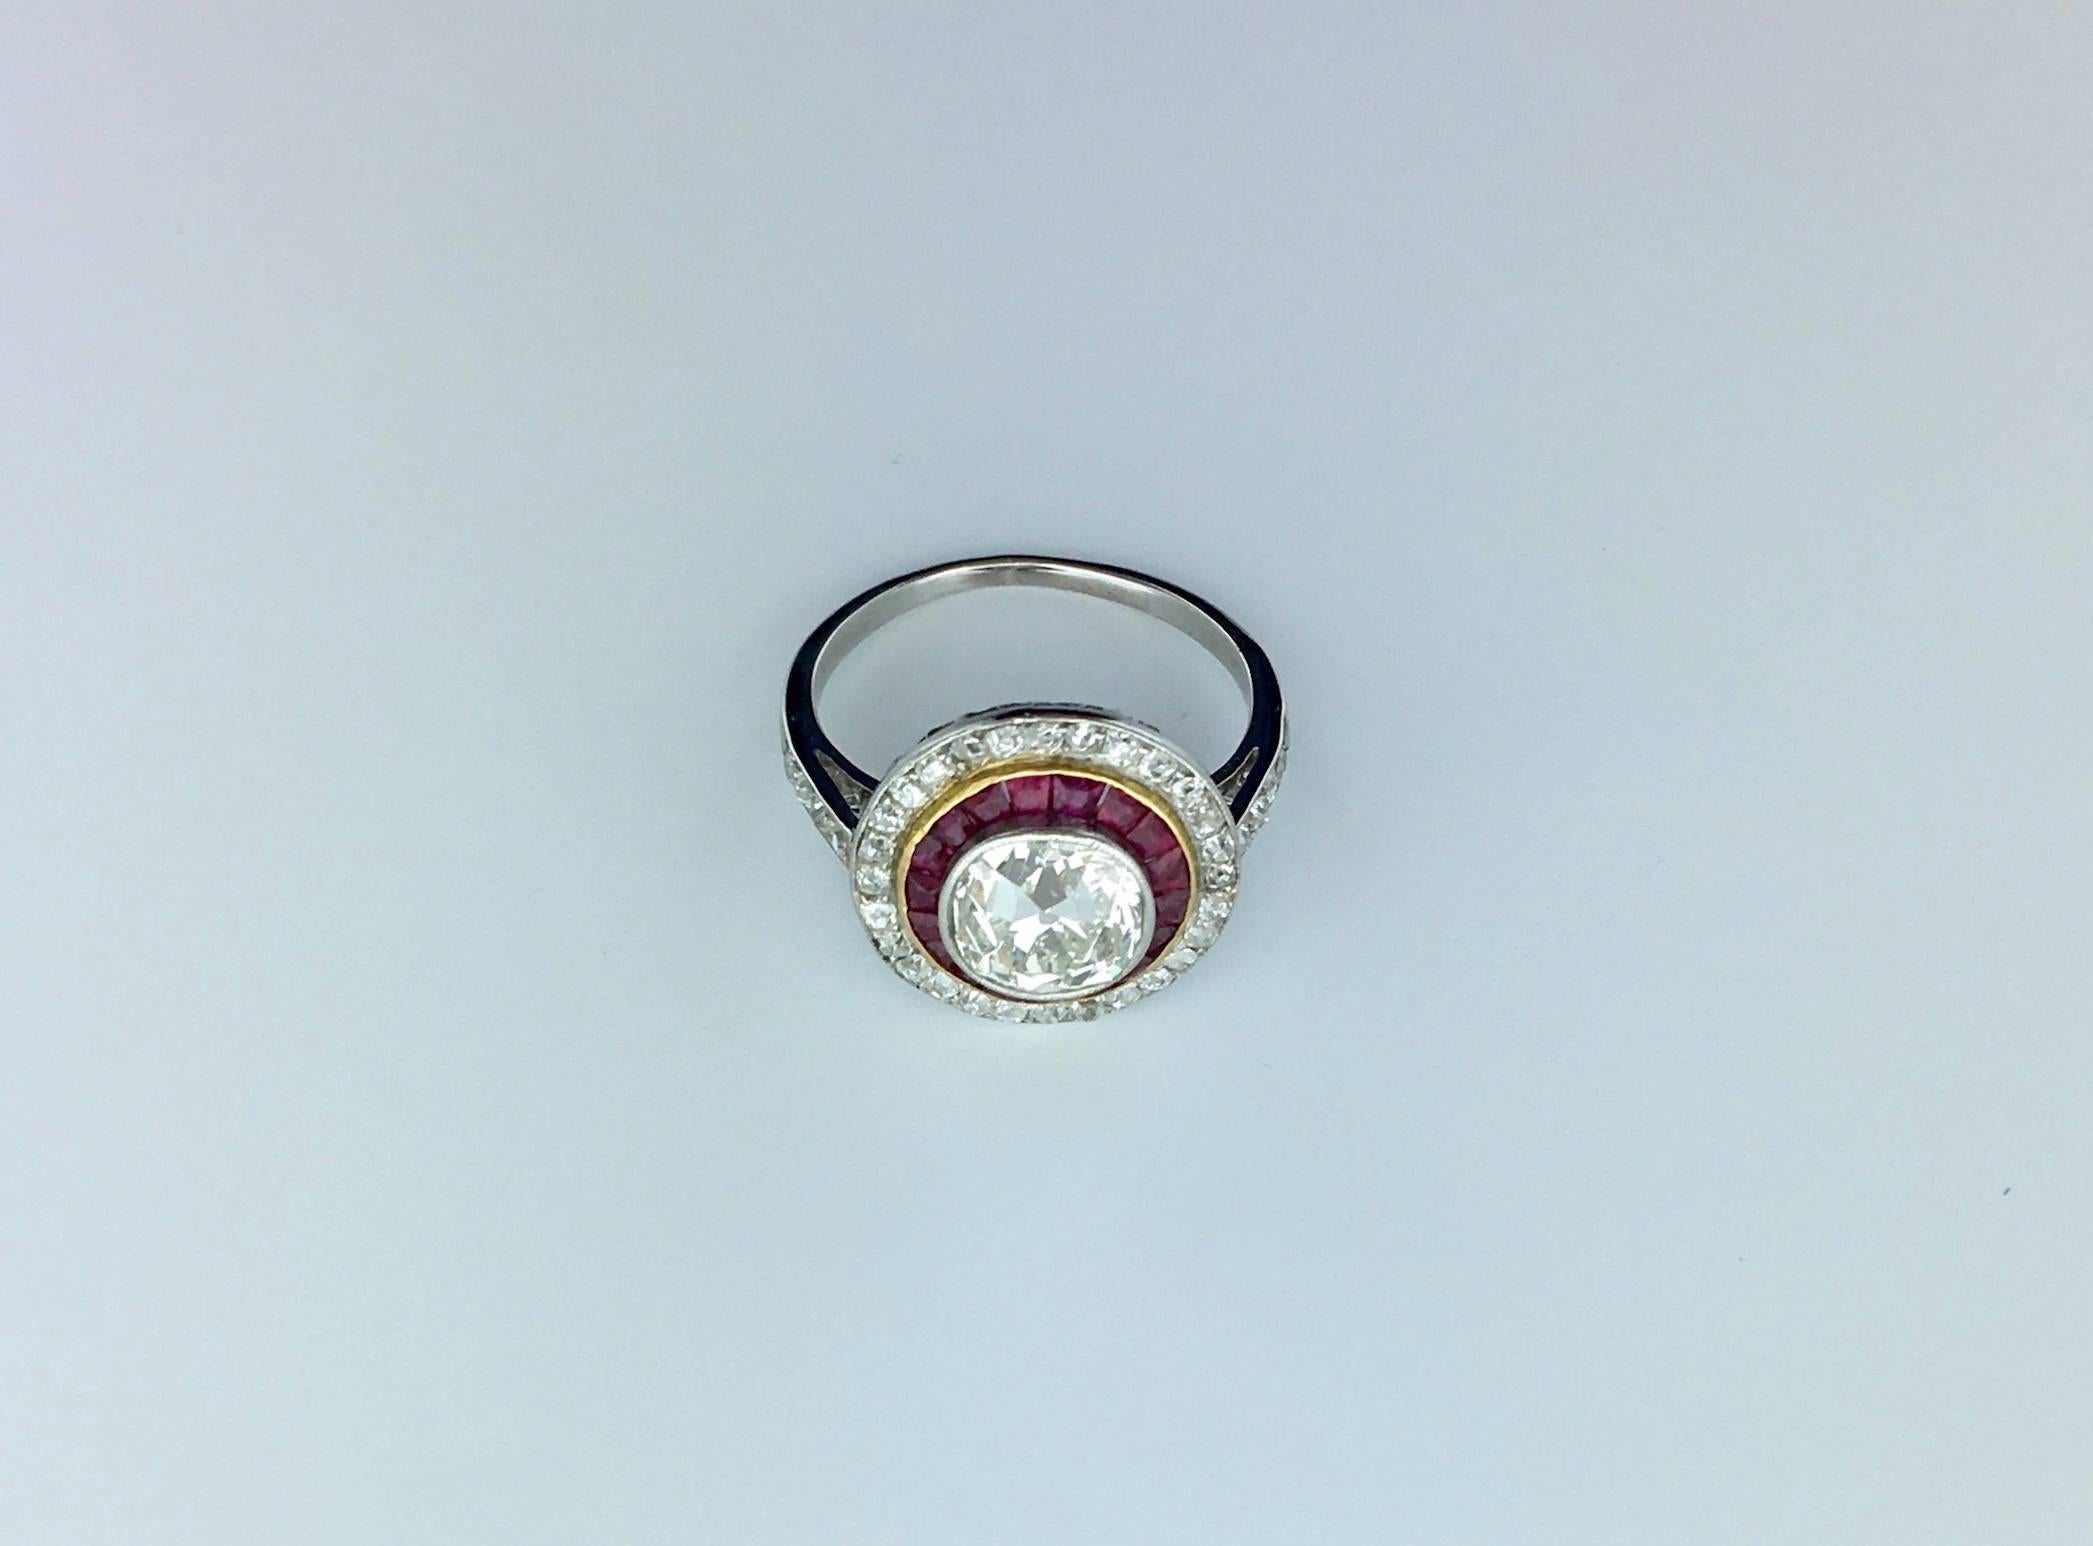 More than 1.30 carats old mine diamond mounted in platinum 850 and 18k gold 750 Art Deco ring surrounded by calibrated ruby and old mine diamond, circa 1925
Gross weight: 4.00 g.
Size Us 5, Eur 49.5 